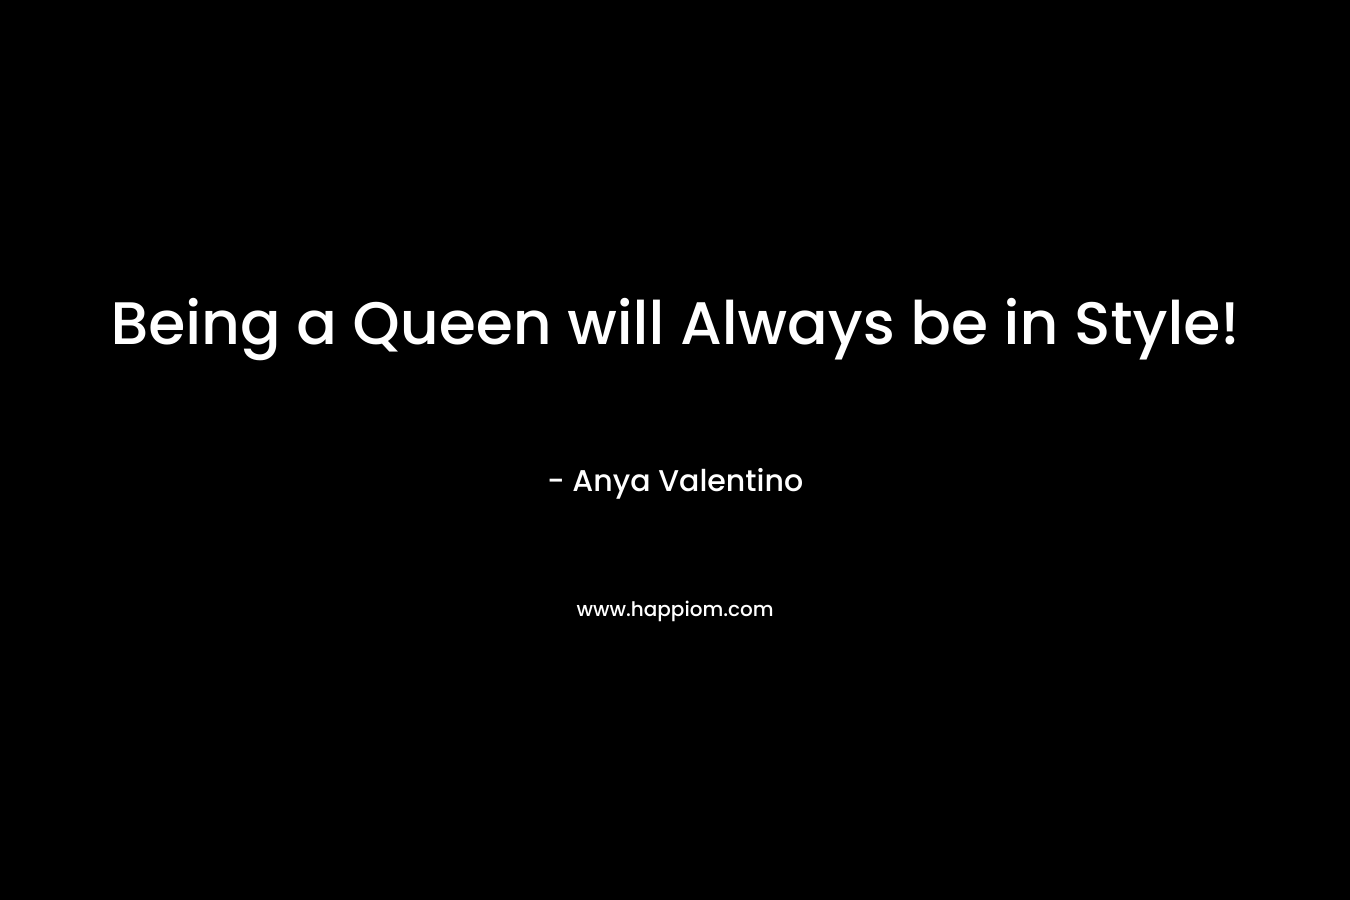 Being a Queen will Always be in Style!